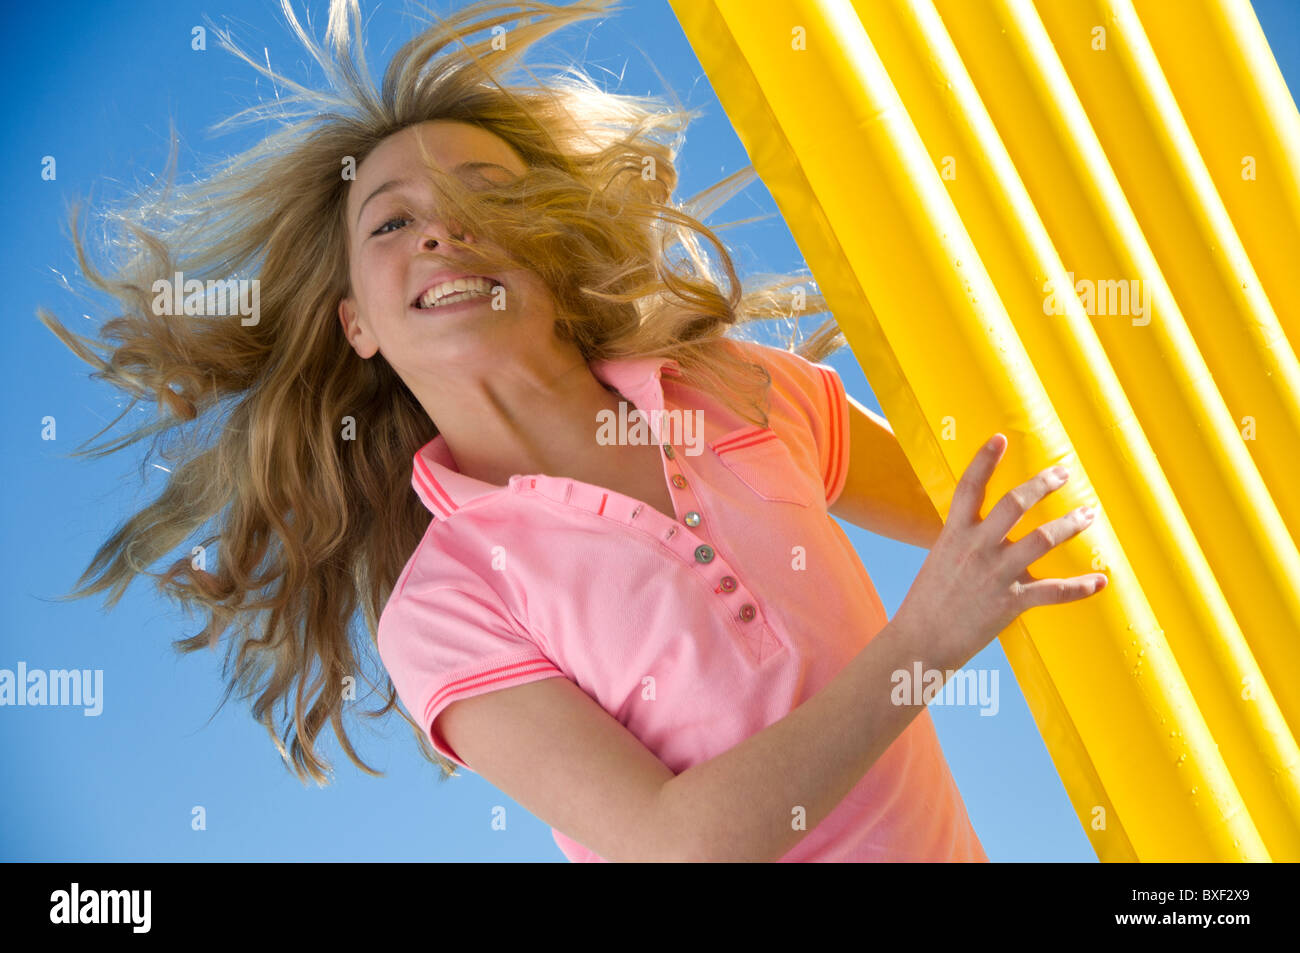 Fun Holiday Vibrant Action image attractive teenage girl 13-15 years with colourful floater lilo with hair blowing in sea breeze on vacation outdoors Stock Photo